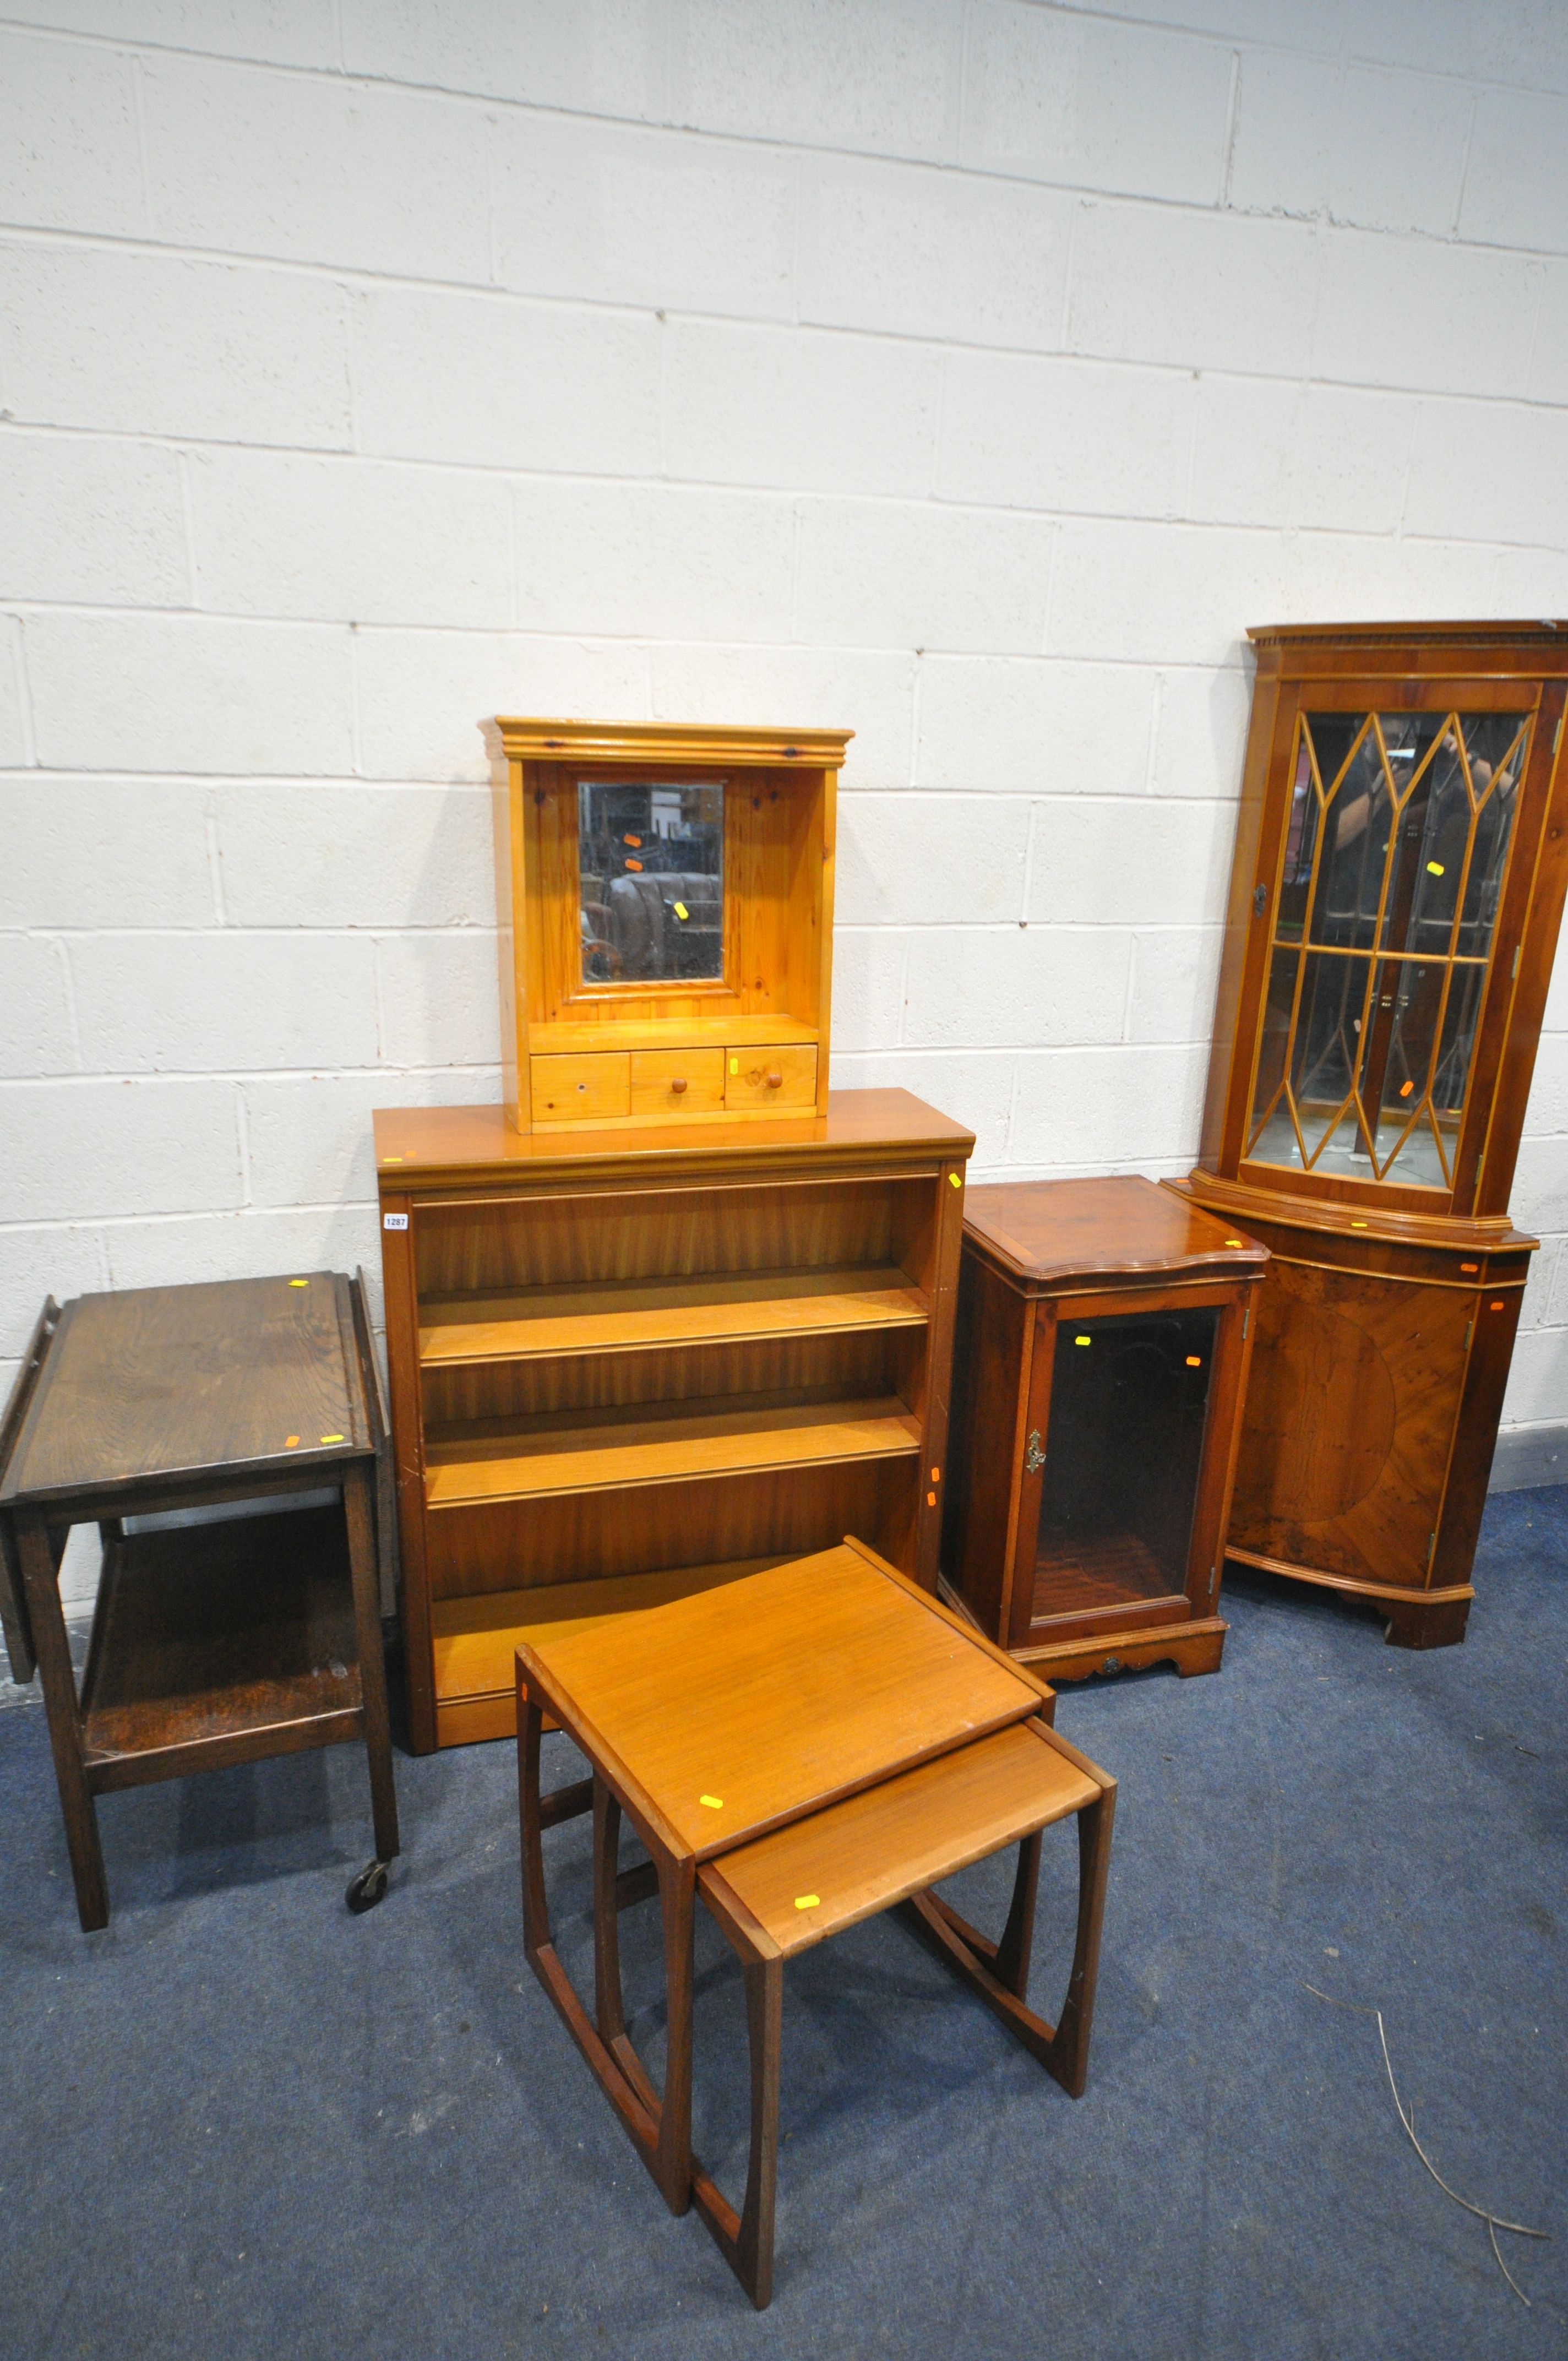 A SELECTION OF OCCASIONAL FURNITURE, to include a G plan Quadrille teak nest of two tables (